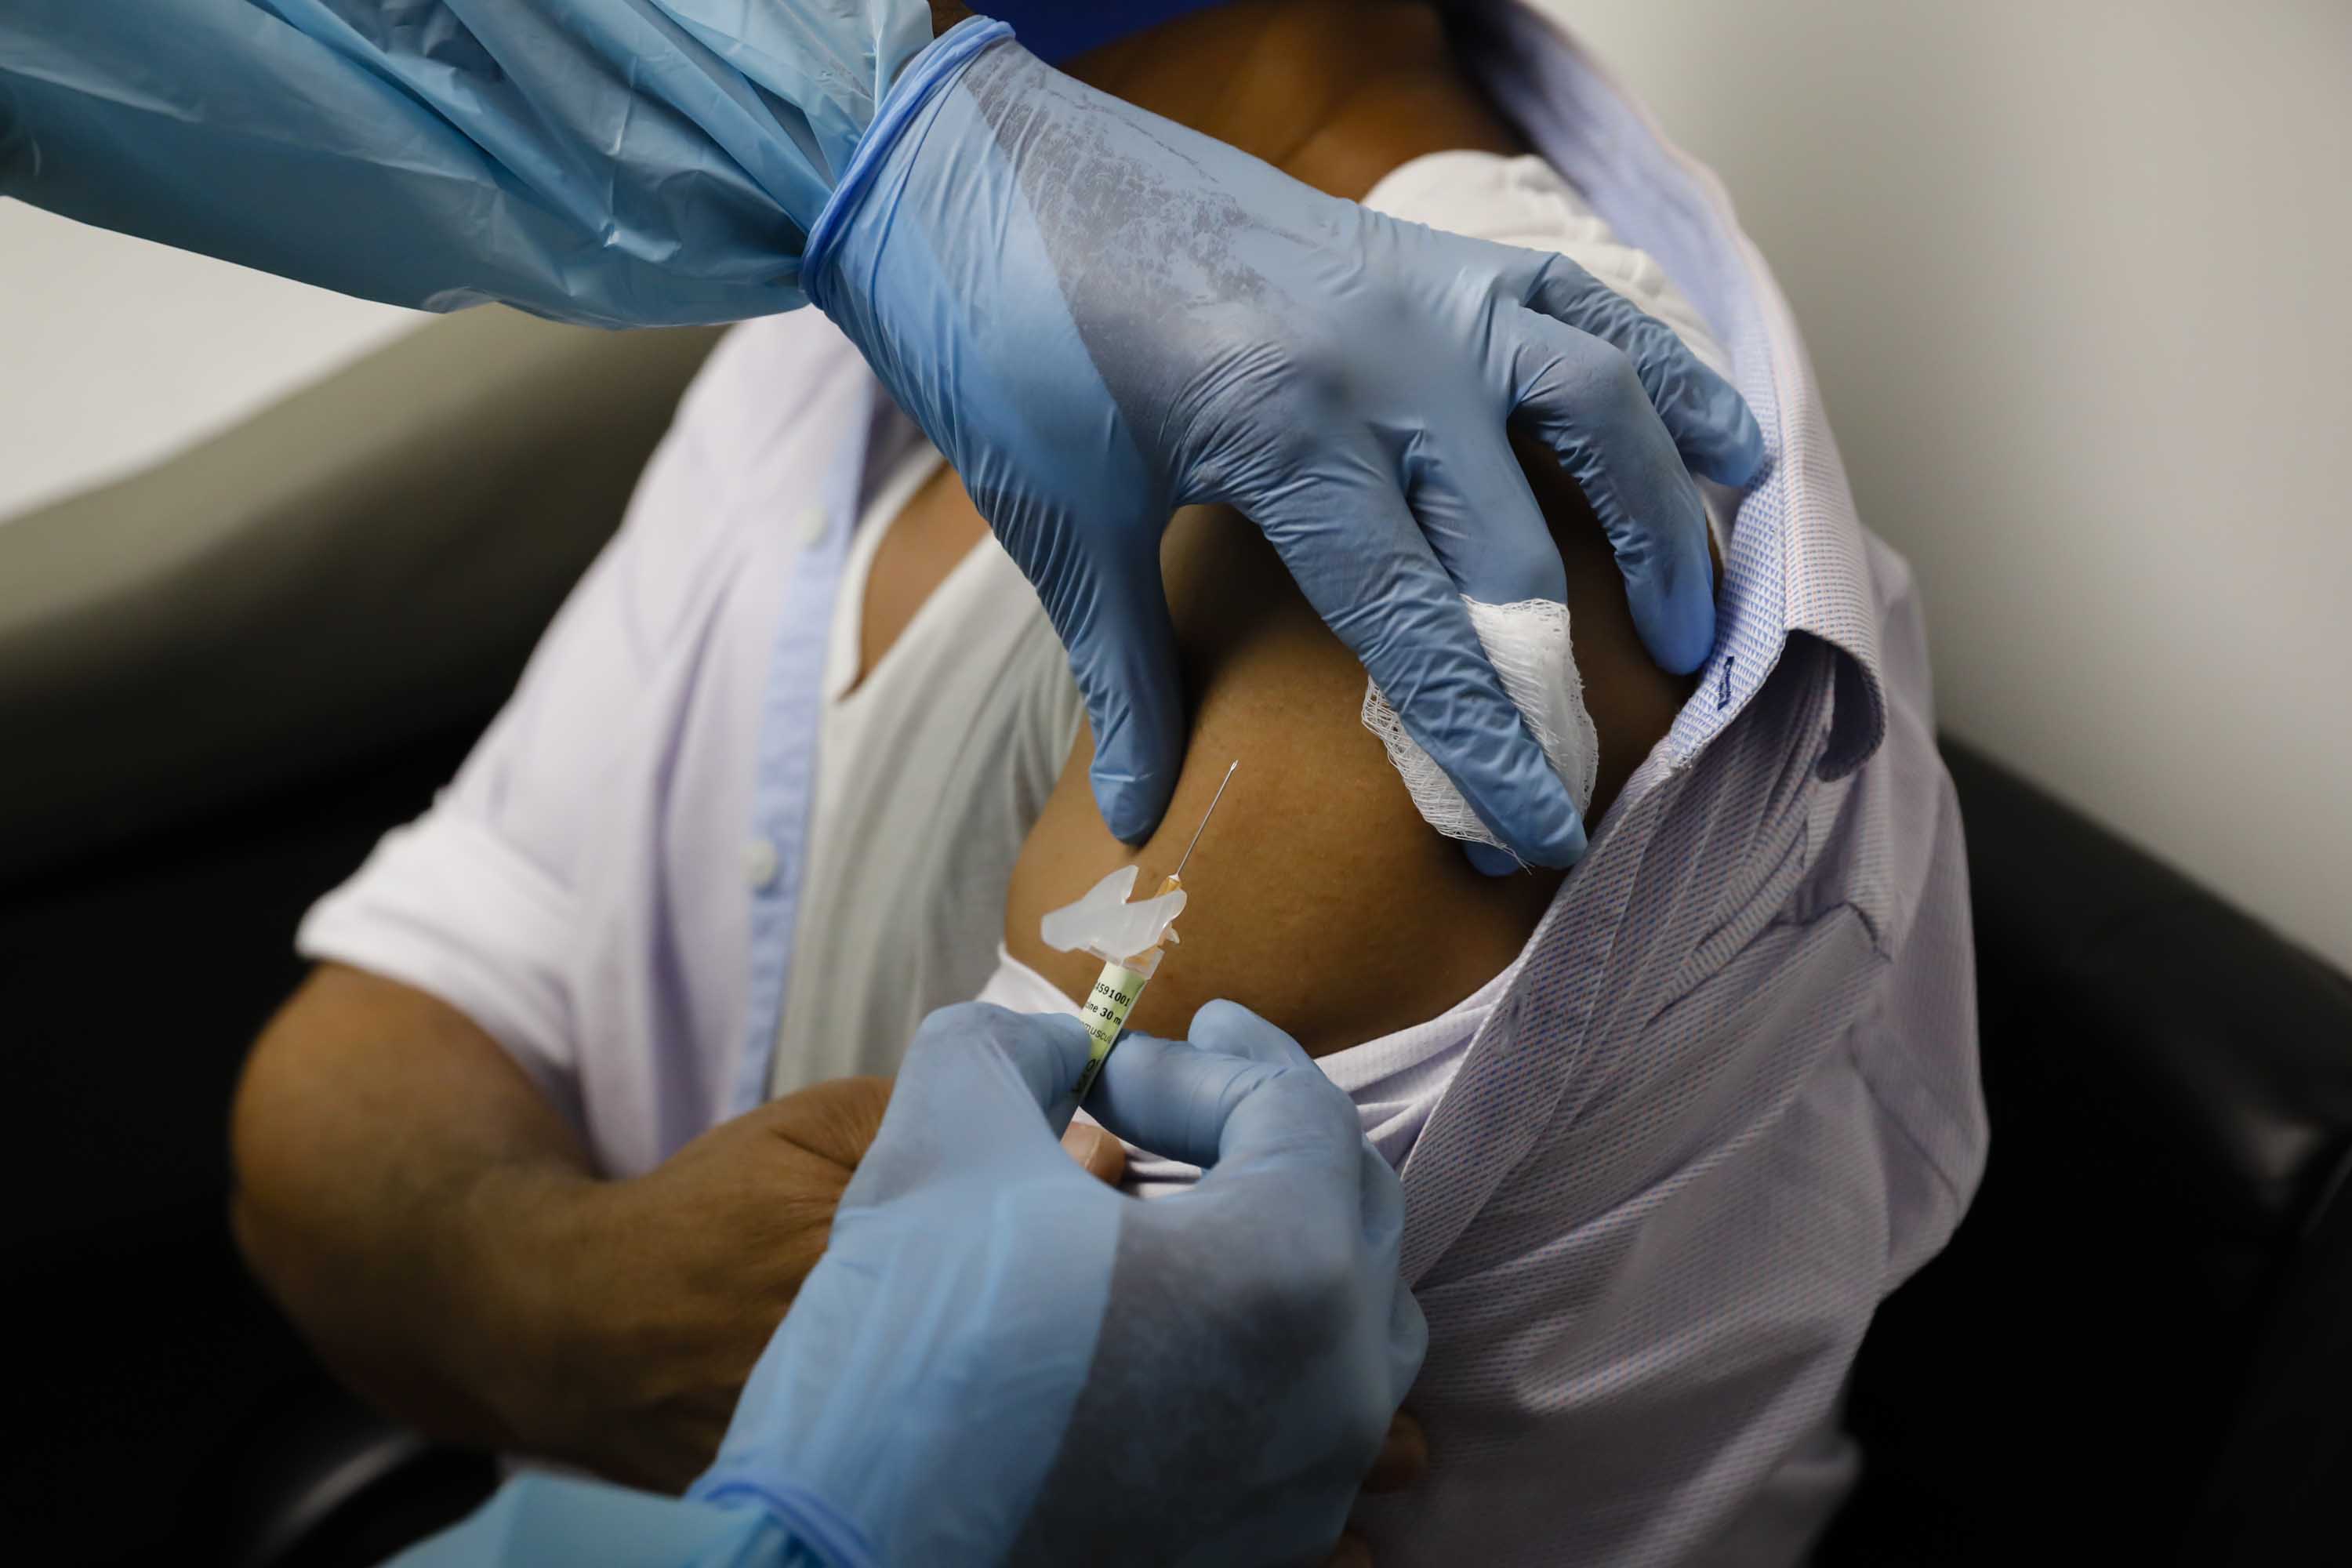 A health worker injects a person during clinical trials for a Covid-19 vaccine at Research Centers of America in Hollywood, Florida, on Sept. 9.